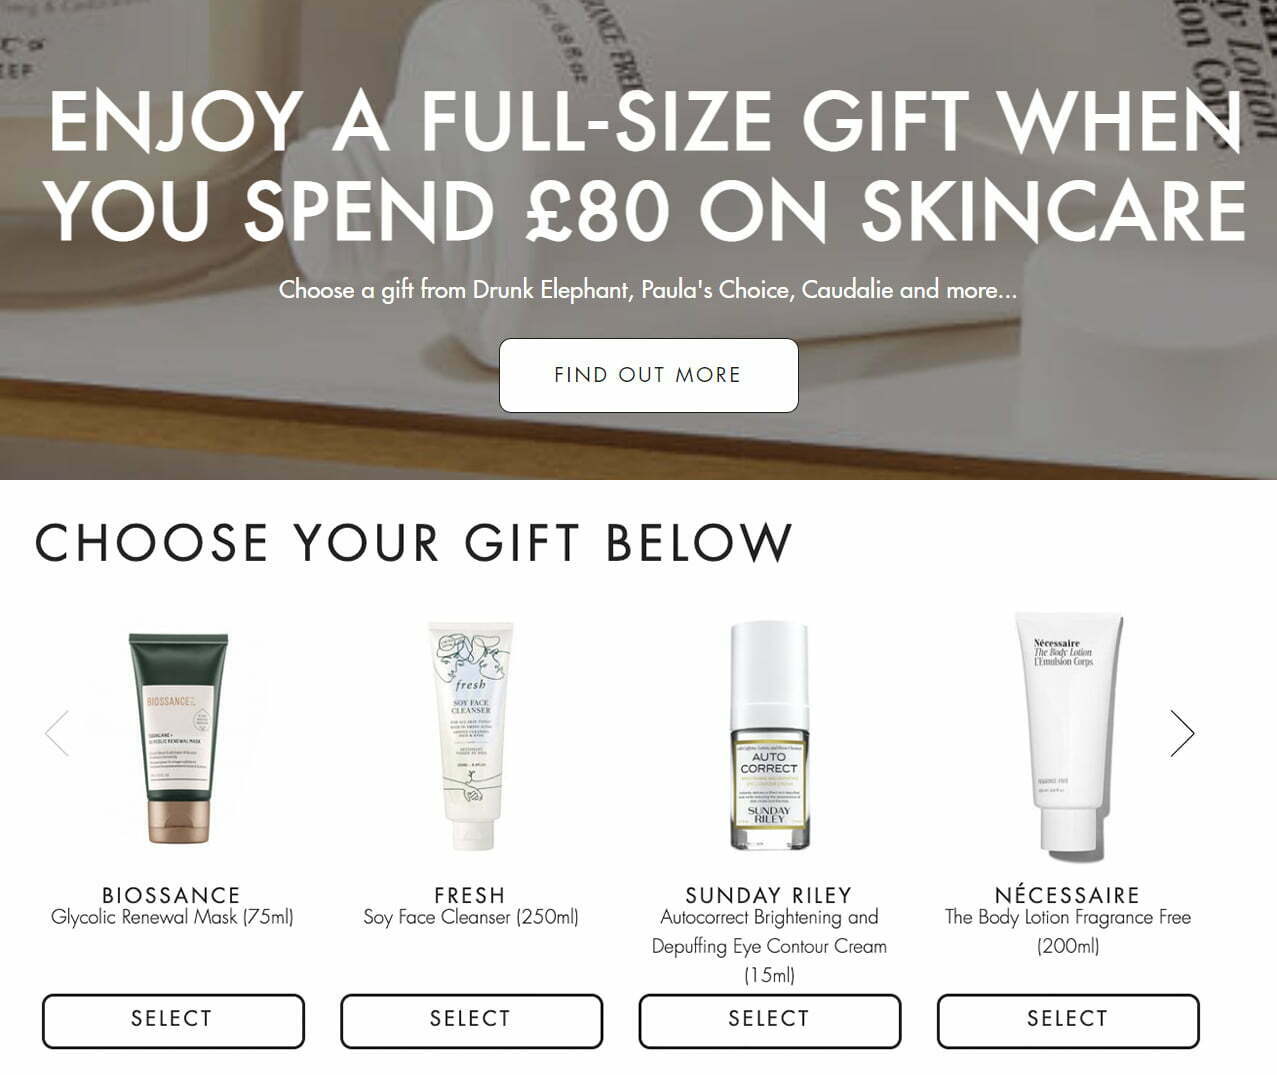 Select a free full-sized item when you spend £80 on skincare at Space NK